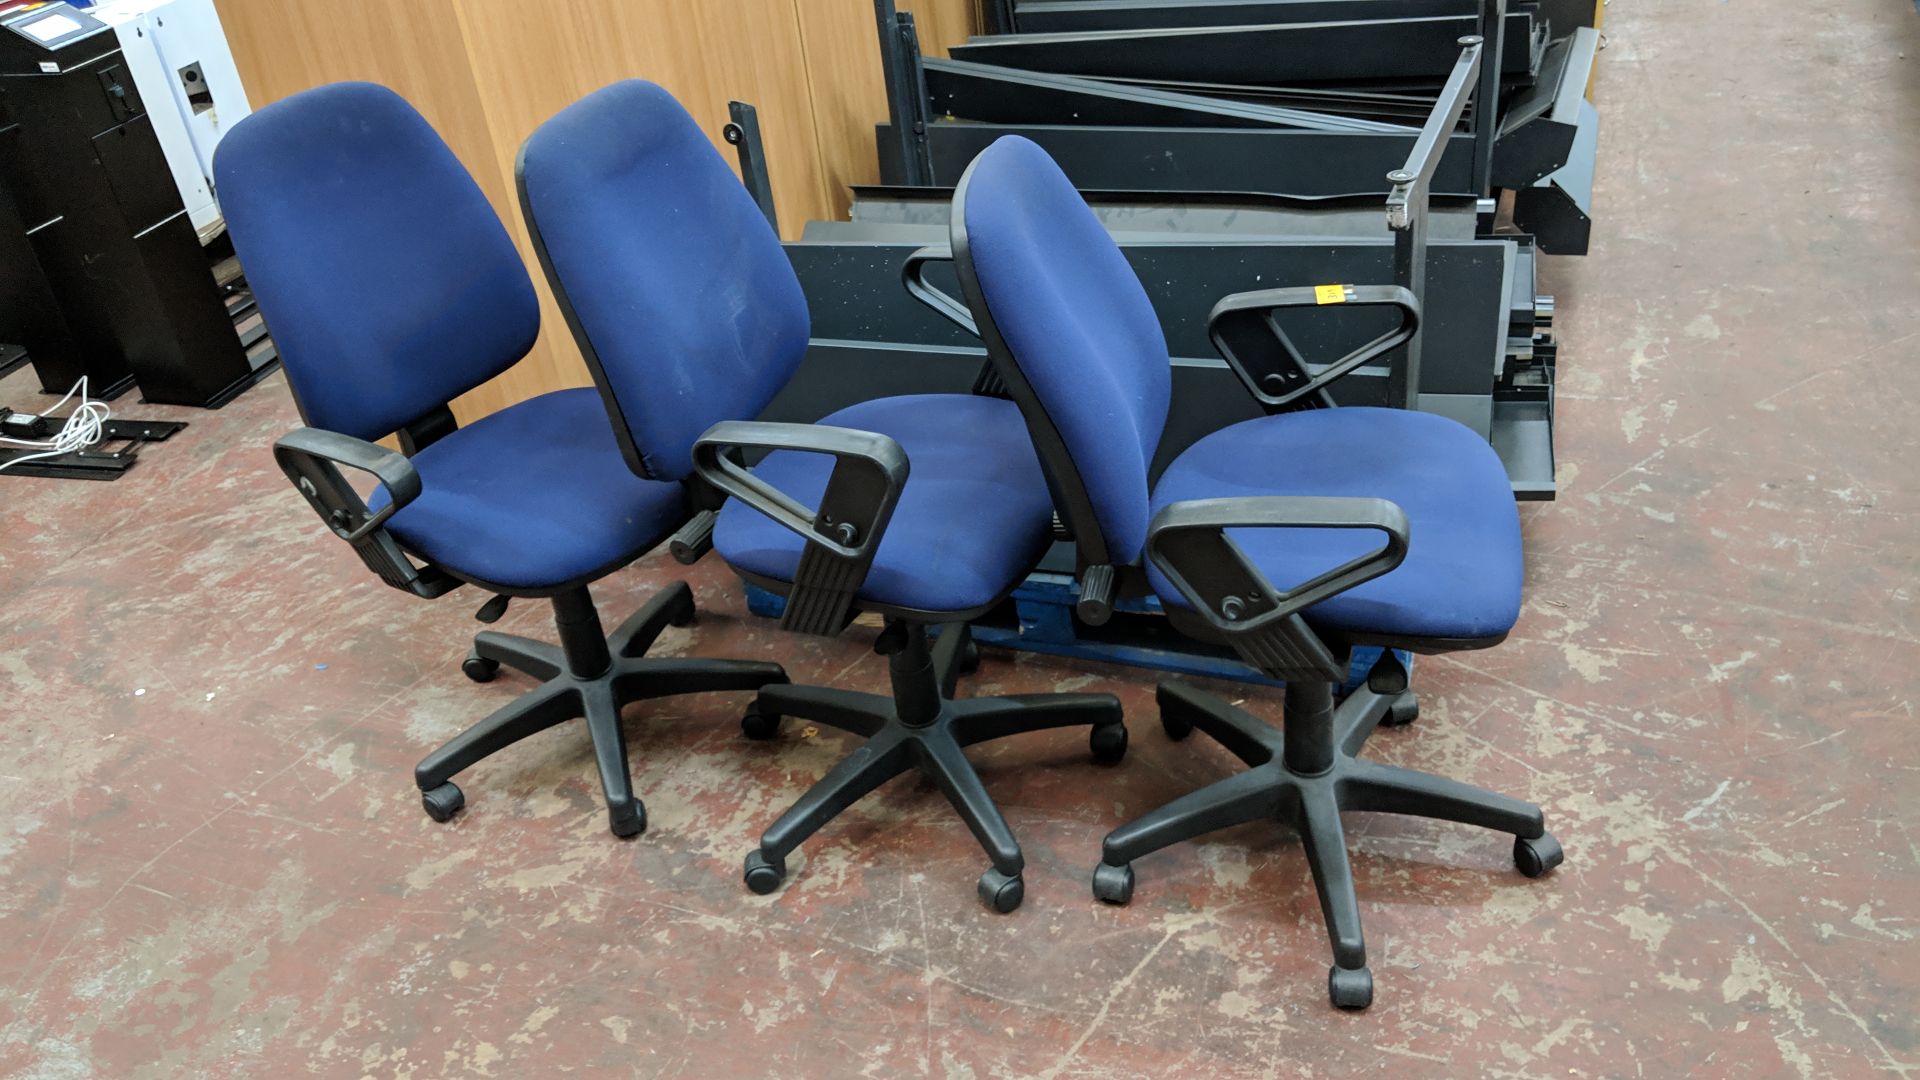 3 off matching dark blue upholstered operators' chairs with arms